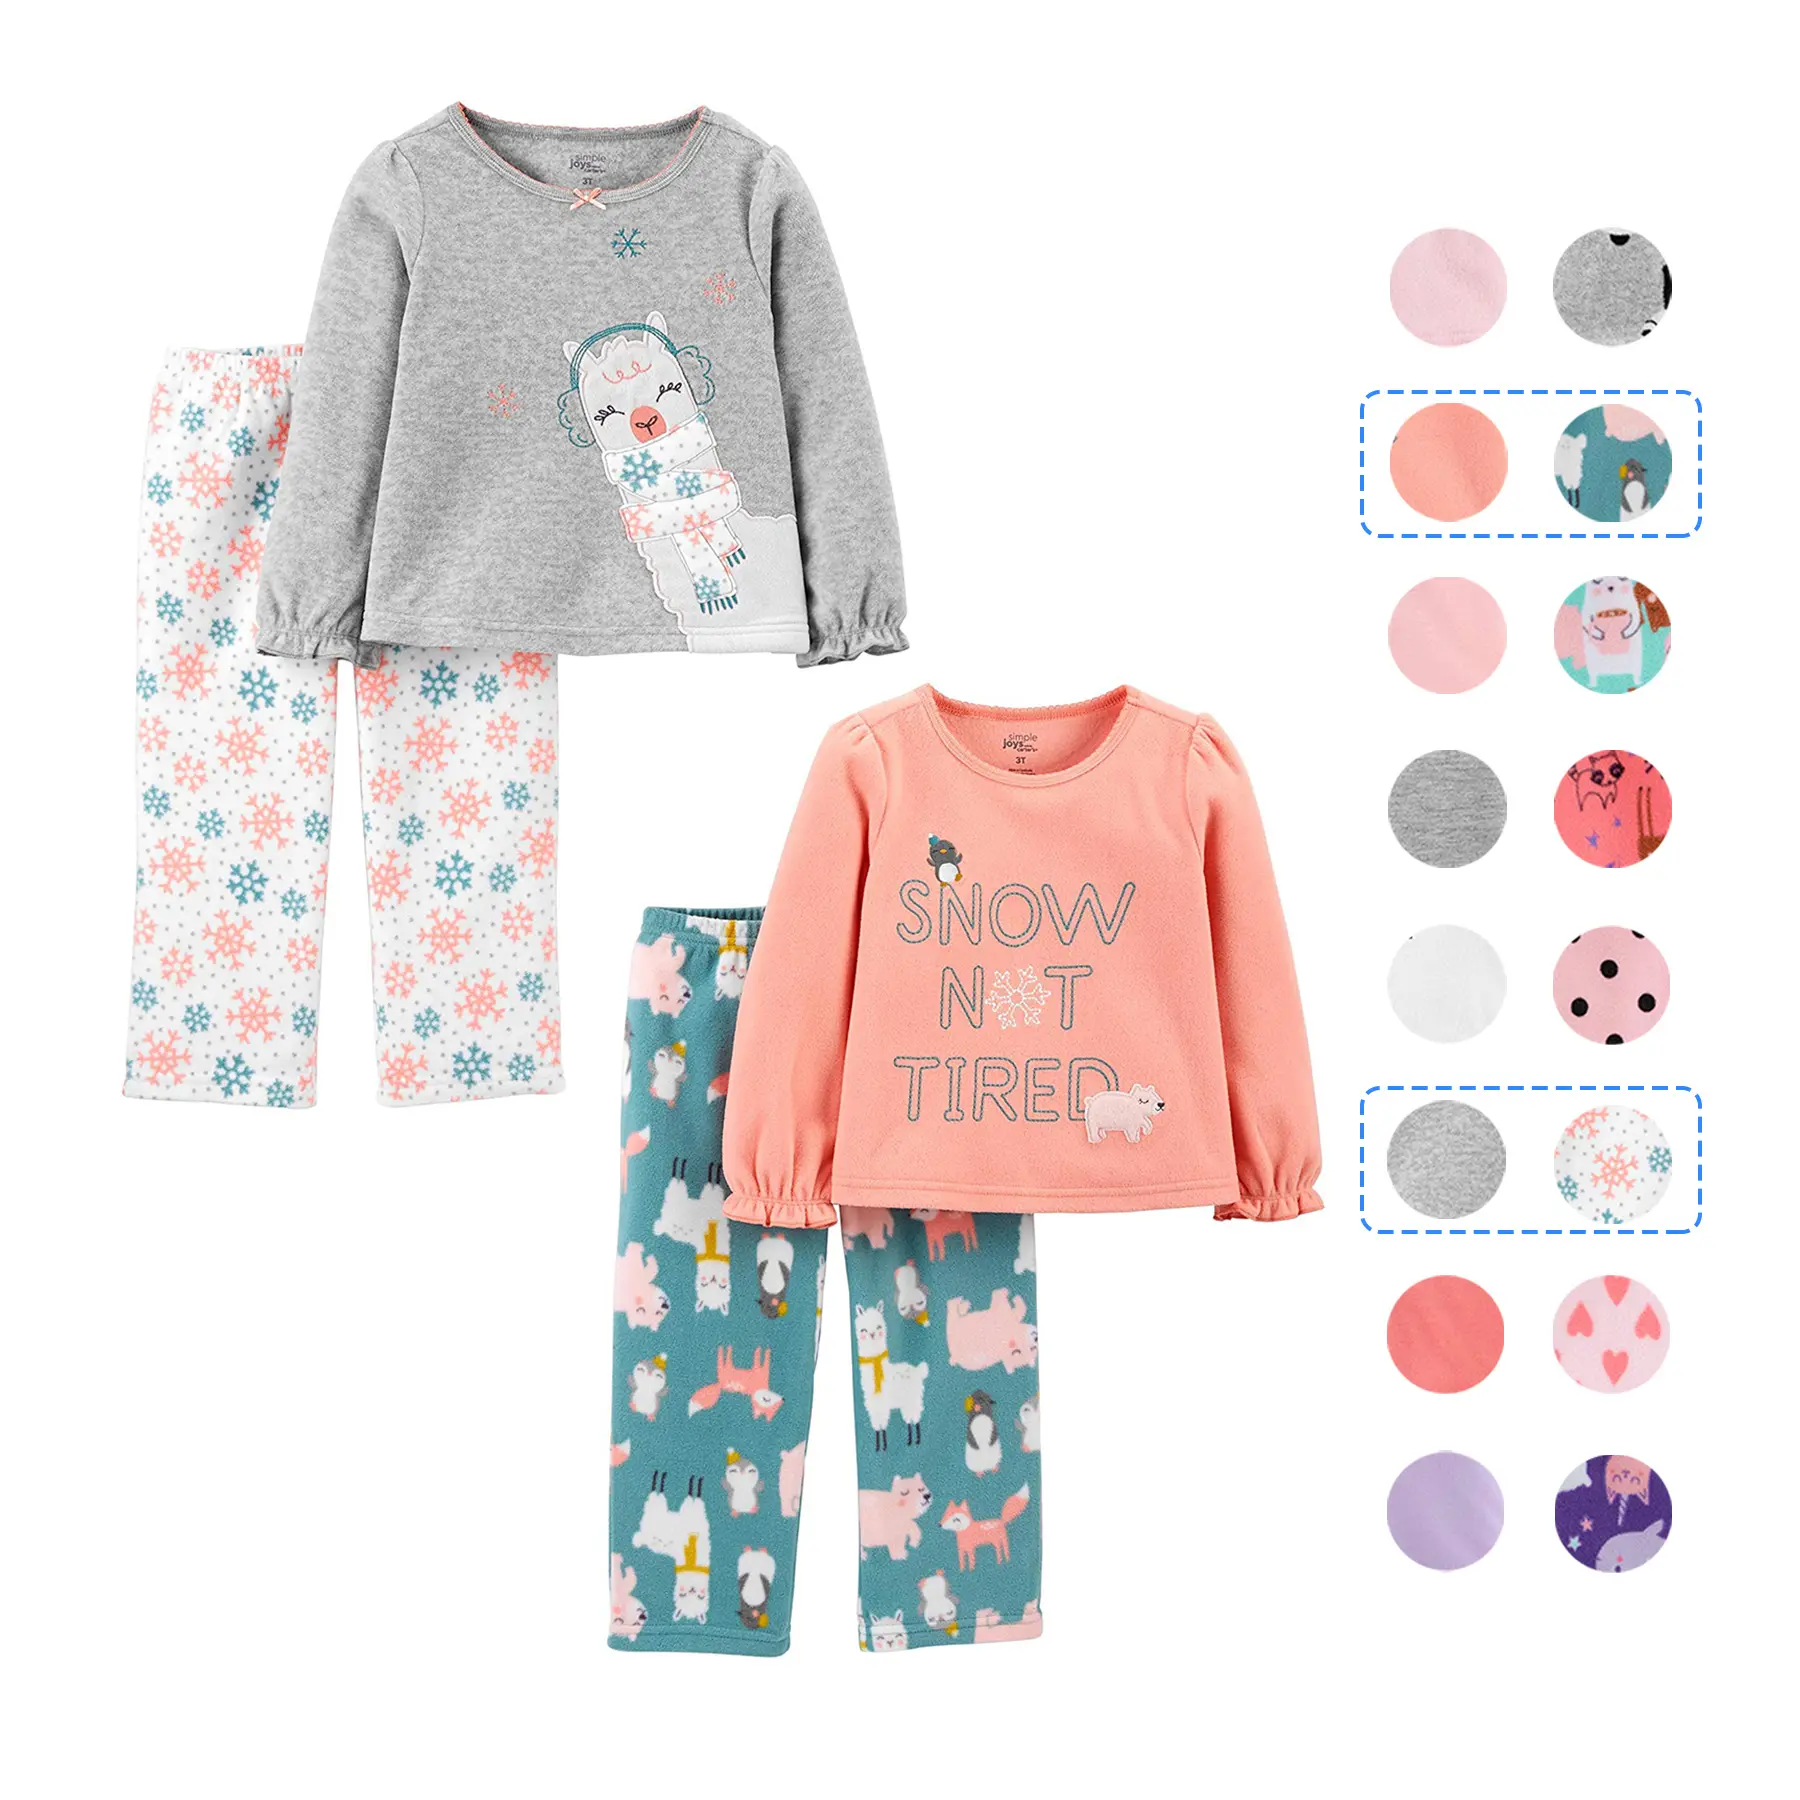 Candy Girl Children's Pajamas Baby Loose And Comfortable Clothes Family Suit 2 Clothes Kids Pyjamas 100% Cotton Pajamas